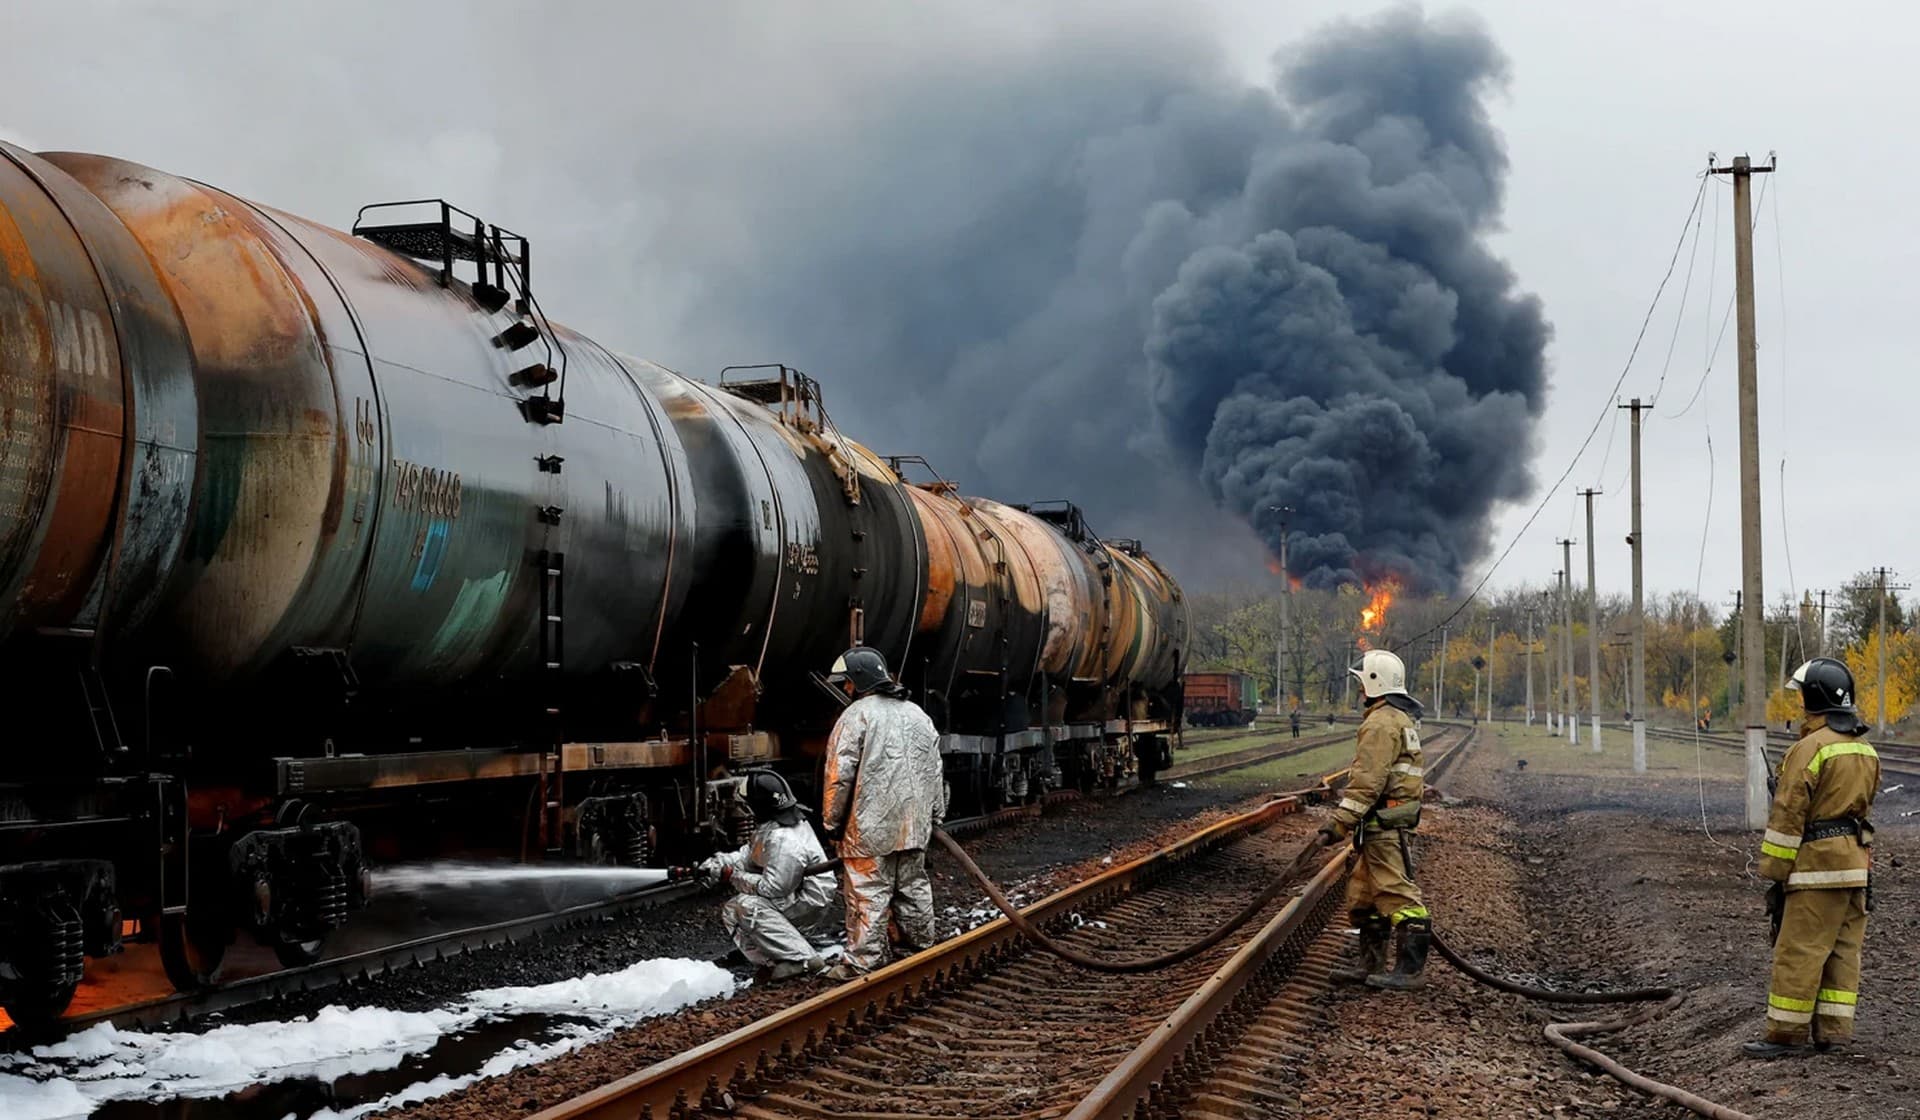 Firefighters work to extinguish fire following recent shelling at a railway junction in Shakhtarsk